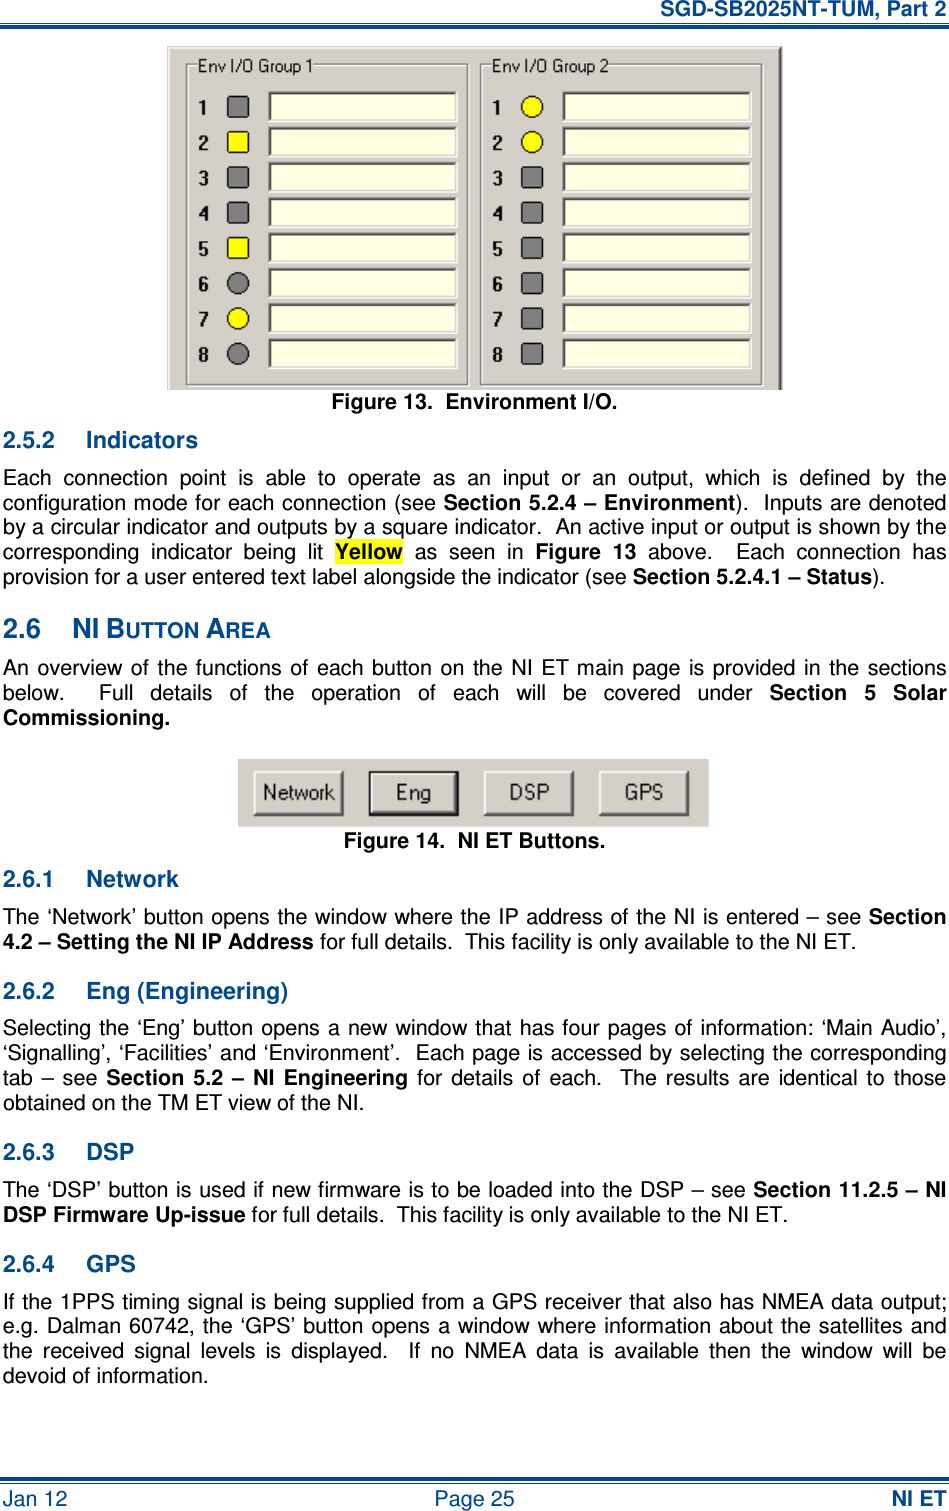   SGD-SB2025NT-TUM, Part 2 Jan 12  Page 25 NI ET Figure 13.  Environment I/O. 2.5.2  Indicators Each  connection  point  is  able  to  operate  as  an  input  or  an  output,  which  is  defined  by  the configuration mode for each connection (see Section 5.2.4 – Environment).  Inputs are denoted by a circular indicator and outputs by a square indicator.  An active input or output is shown by the corresponding  indicator  being  lit Yellow  as  seen  in Figure  13  above.    Each  connection  has provision for a user entered text label alongside the indicator (see Section 5.2.4.1 – Status). 2.6  NI BUTTON AREA An overview of the functions of  each button  on  the  NI  ET main  page is provided in the sections below.    Full  details  of  the  operation  of  each  will  be  covered  under Section  5  Solar Commissioning. Figure 14.  NI ET Buttons. 2.6.1  Network The ‘Network’ button opens the window where the IP address of the NI is entered – see Section 4.2 – Setting the NI IP Address for full details.  This facility is only available to the NI ET. 2.6.2  Eng (Engineering) Selecting the ‘Eng’ button opens a new window that has four pages of information: ‘Main Audio’, ‘Signalling’, ‘Facilities’ and ‘Environment’.  Each page is accessed by selecting the corresponding tab  –  see Section  5.2  –  NI  Engineering  for  details  of  each.    The  results  are  identical to  those obtained on the TM ET view of the NI. 2.6.3  DSP The ‘DSP’ button is used if new firmware is to be loaded into the DSP – see Section 11.2.5 – NI DSP Firmware Up-issue for full details.  This facility is only available to the NI ET. 2.6.4  GPS If the 1PPS timing signal is being supplied from a GPS receiver that also has NMEA data output; e.g. Dalman 60742, the ‘GPS’ button opens a window where information about the satellites and the  received  signal  levels  is  displayed.    If  no  NMEA  data  is  available  then  the  window  will  be devoid of information. 